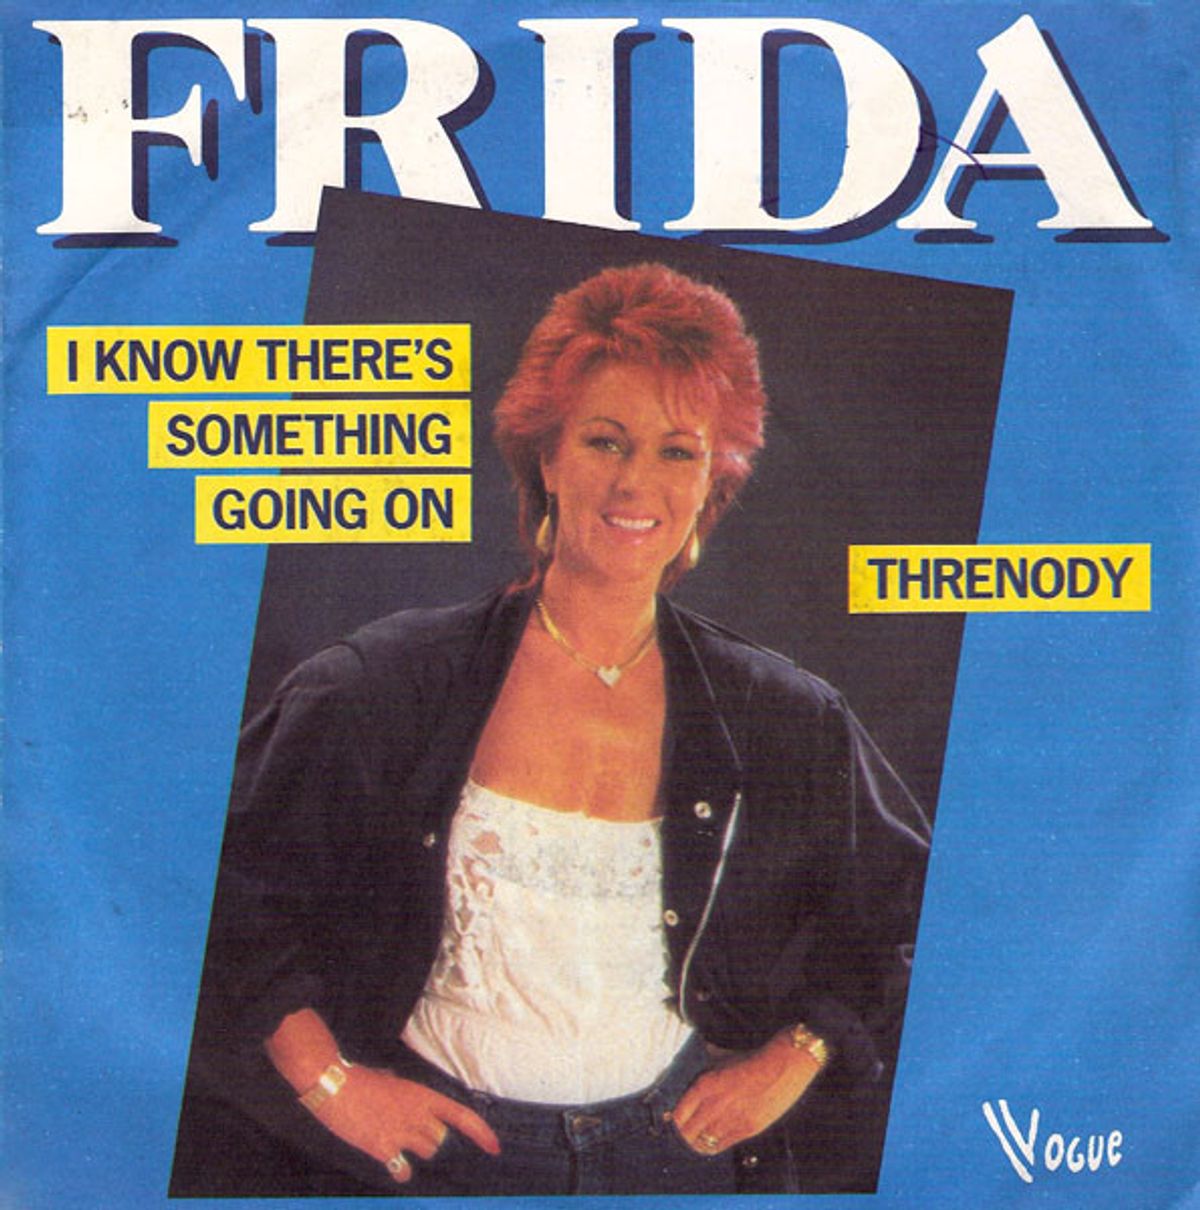 #EightiesEmo - Frida - I Know There’s Something Going On (1982)